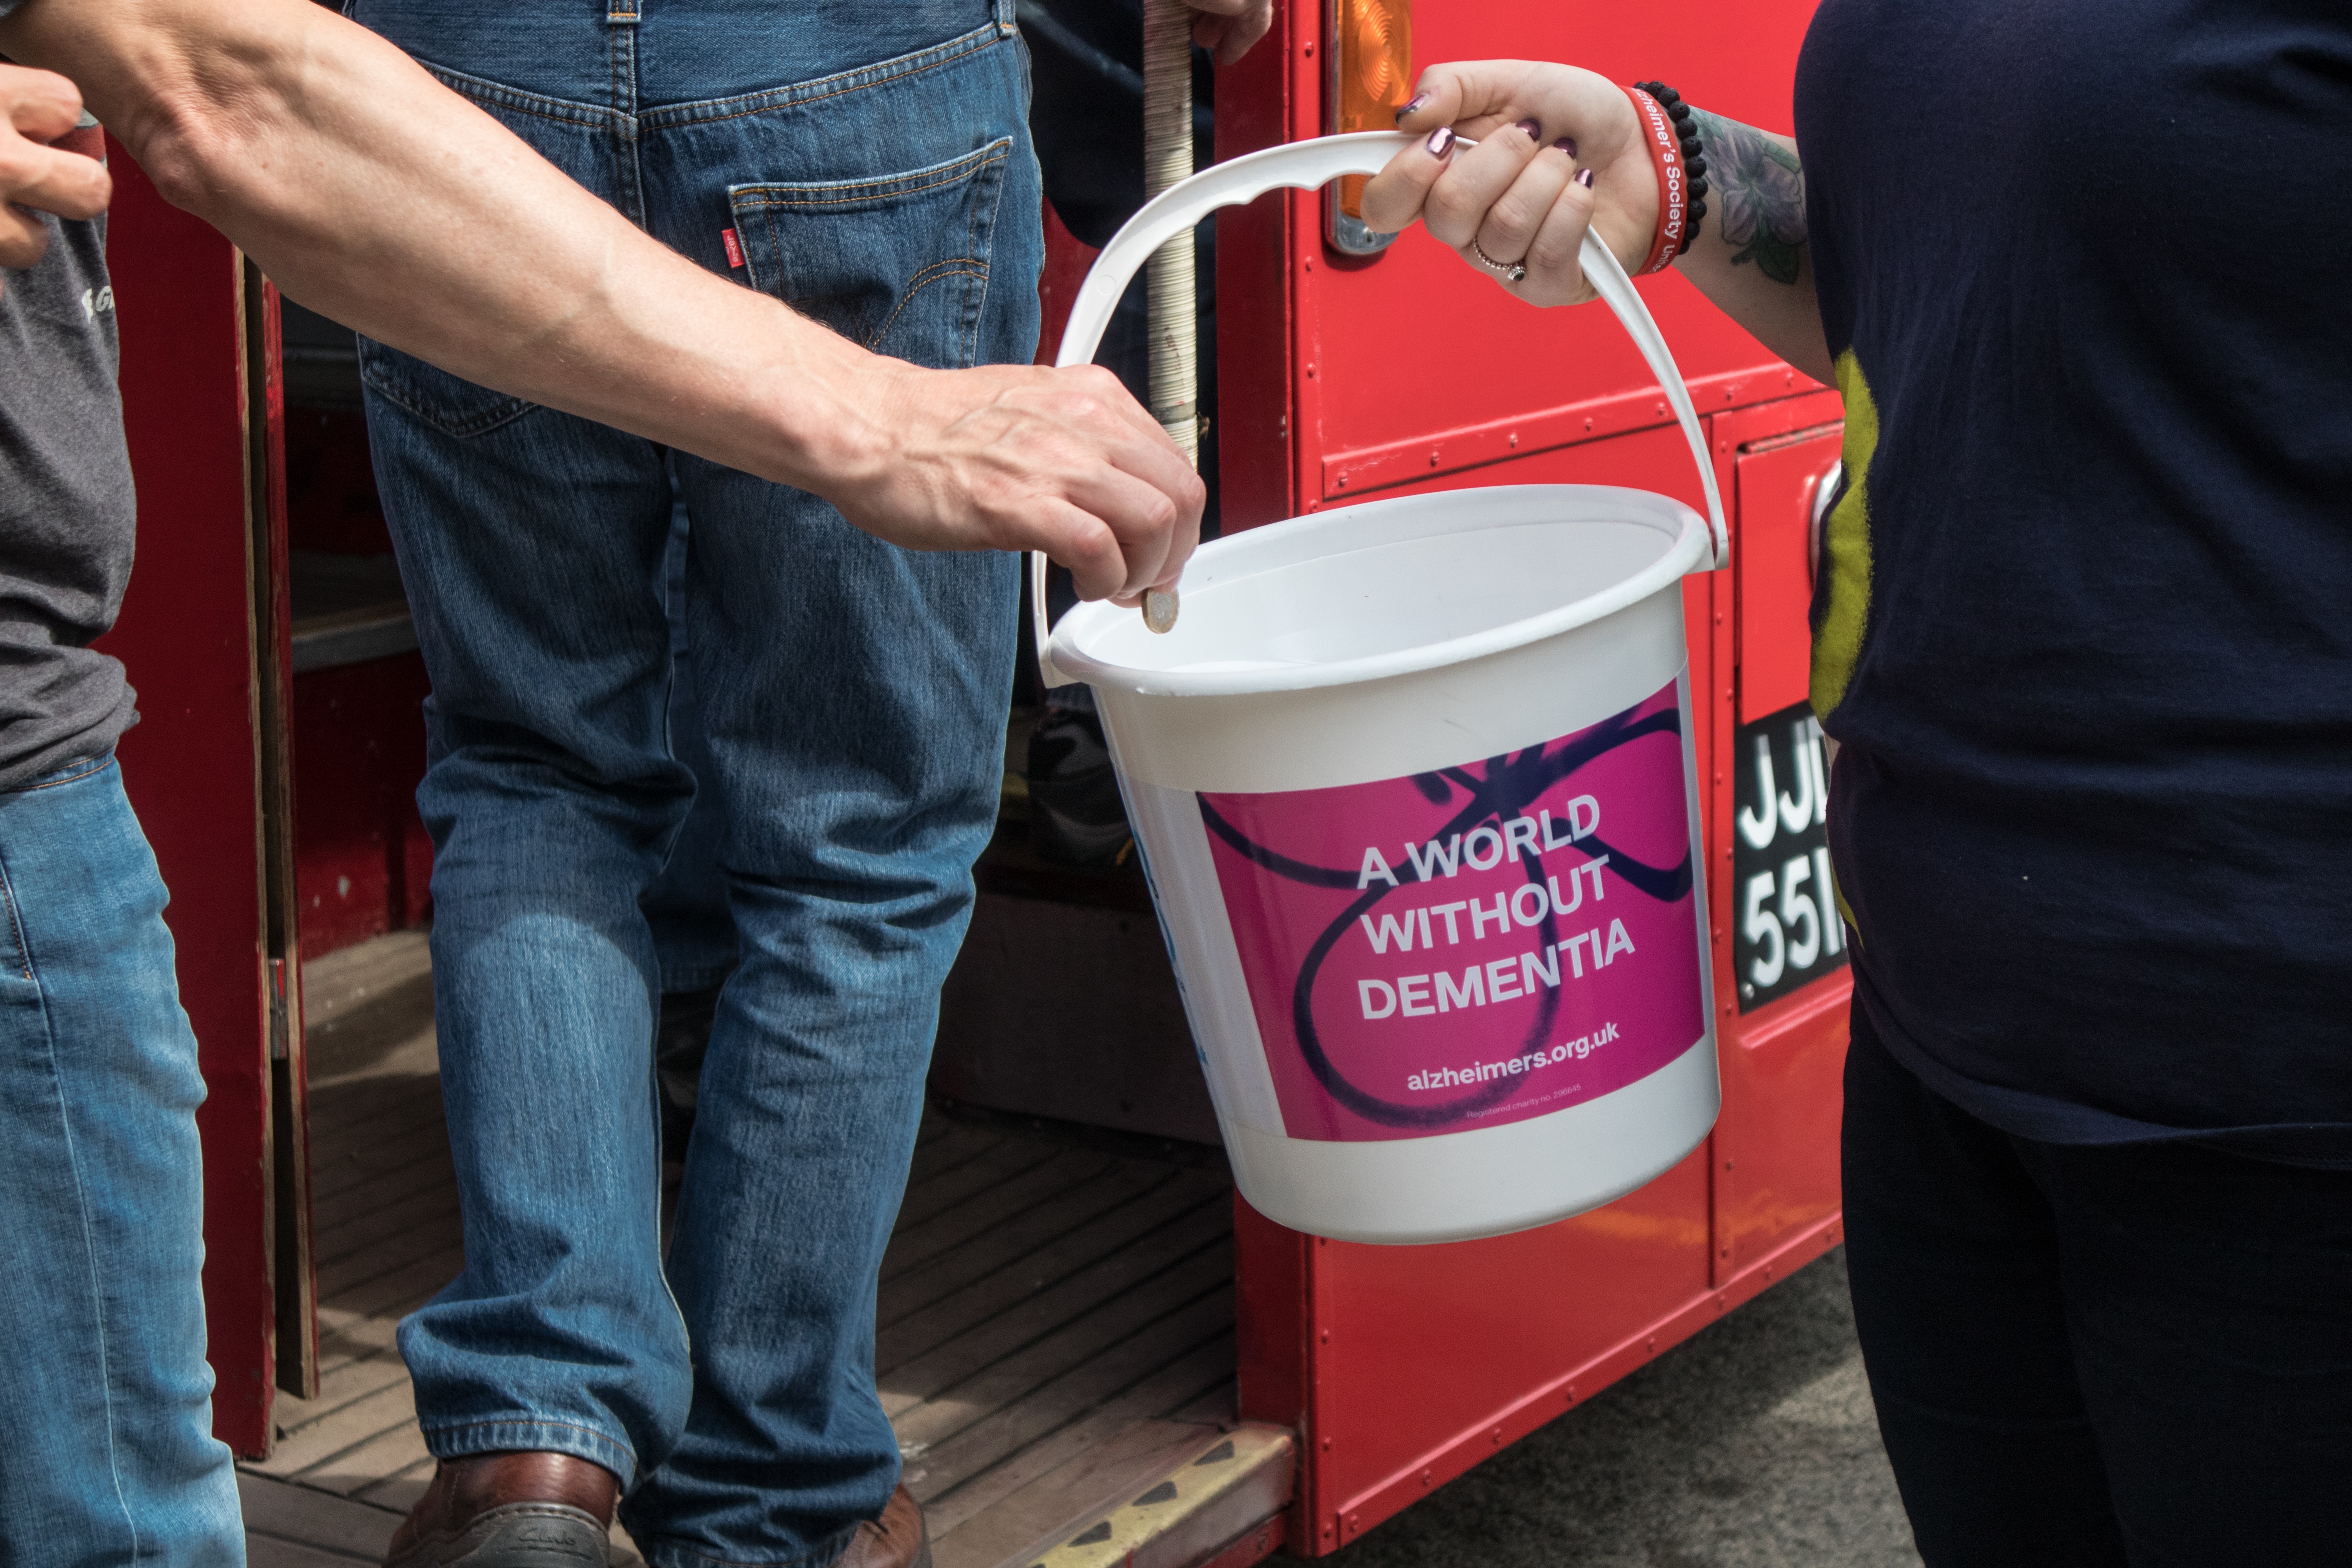 An individual putting money into a fundraising collection bucket